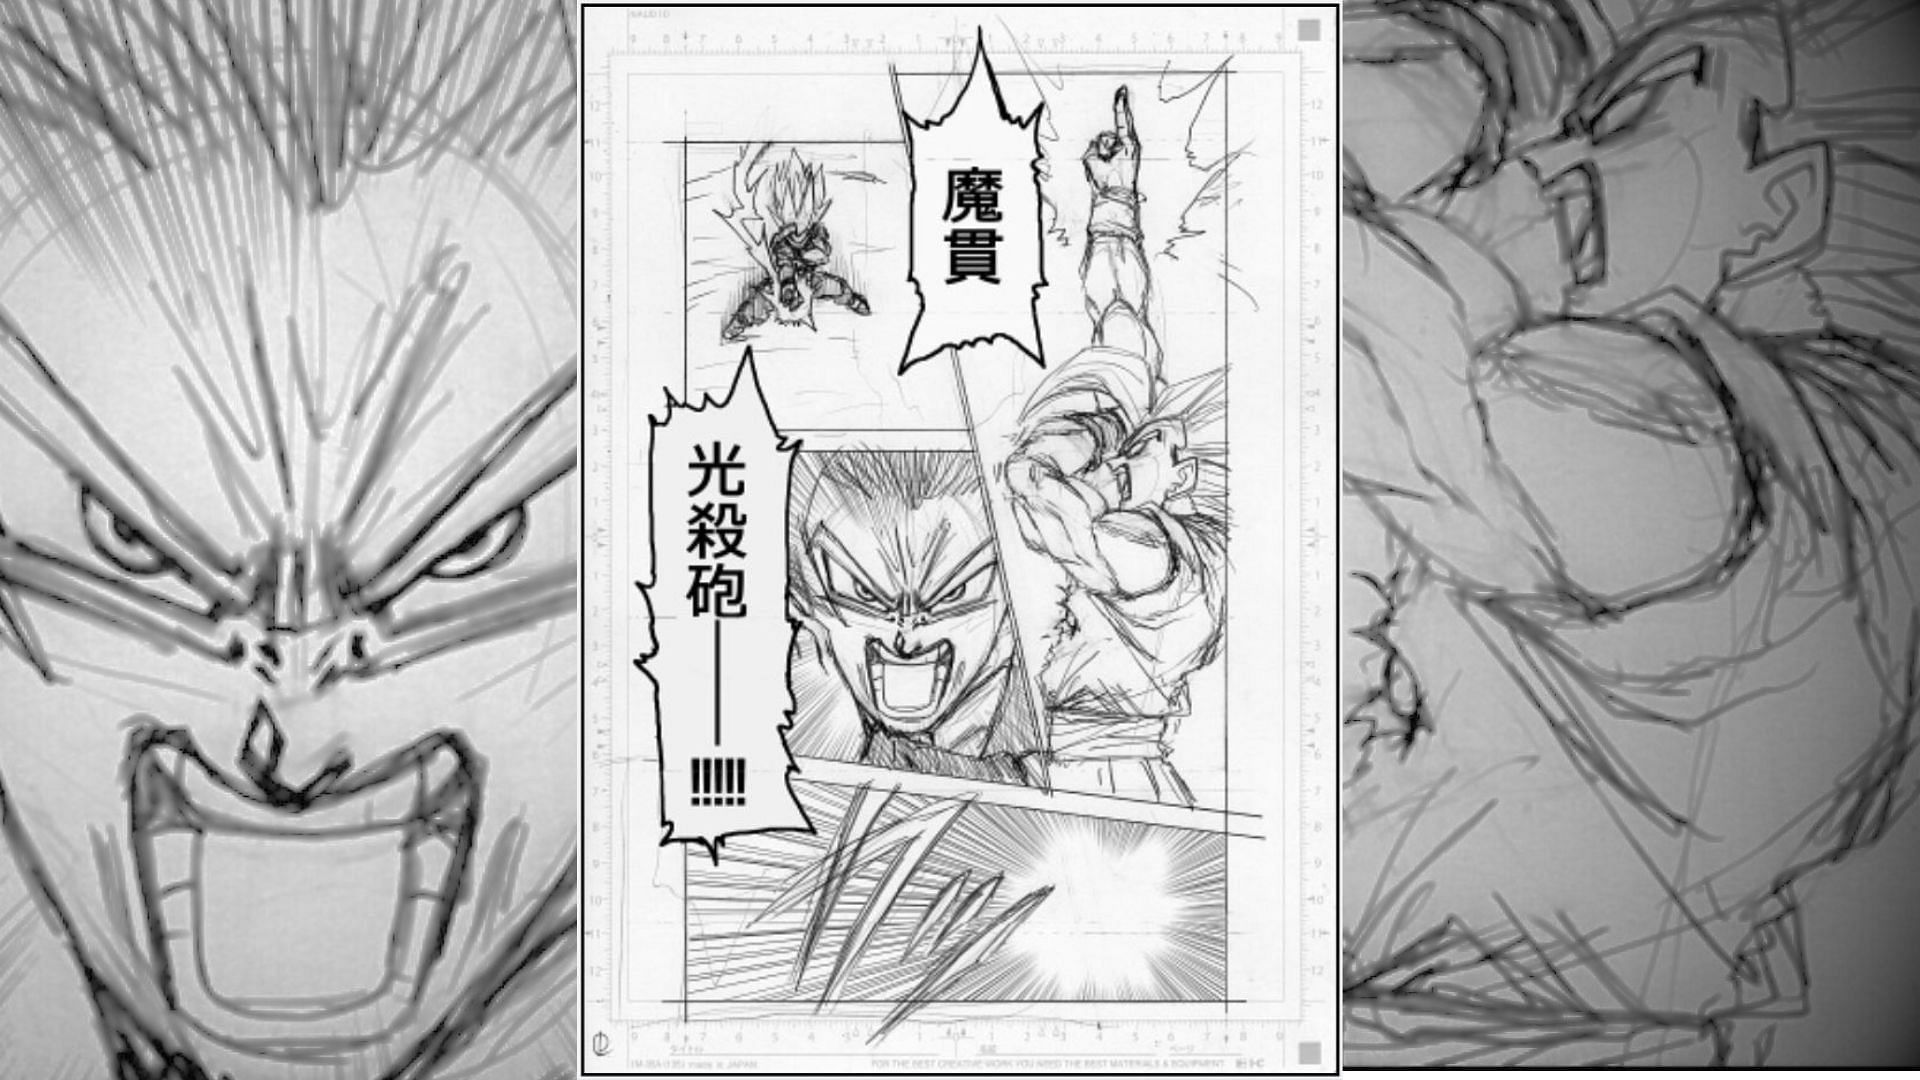 Limited-Time Sneak Peek at Dragon Ball Super Chapter 100's Storyboard! Get  a Preview of One Page from the Chapter Releasing in V Jump's Super-Sized  February Edition!]